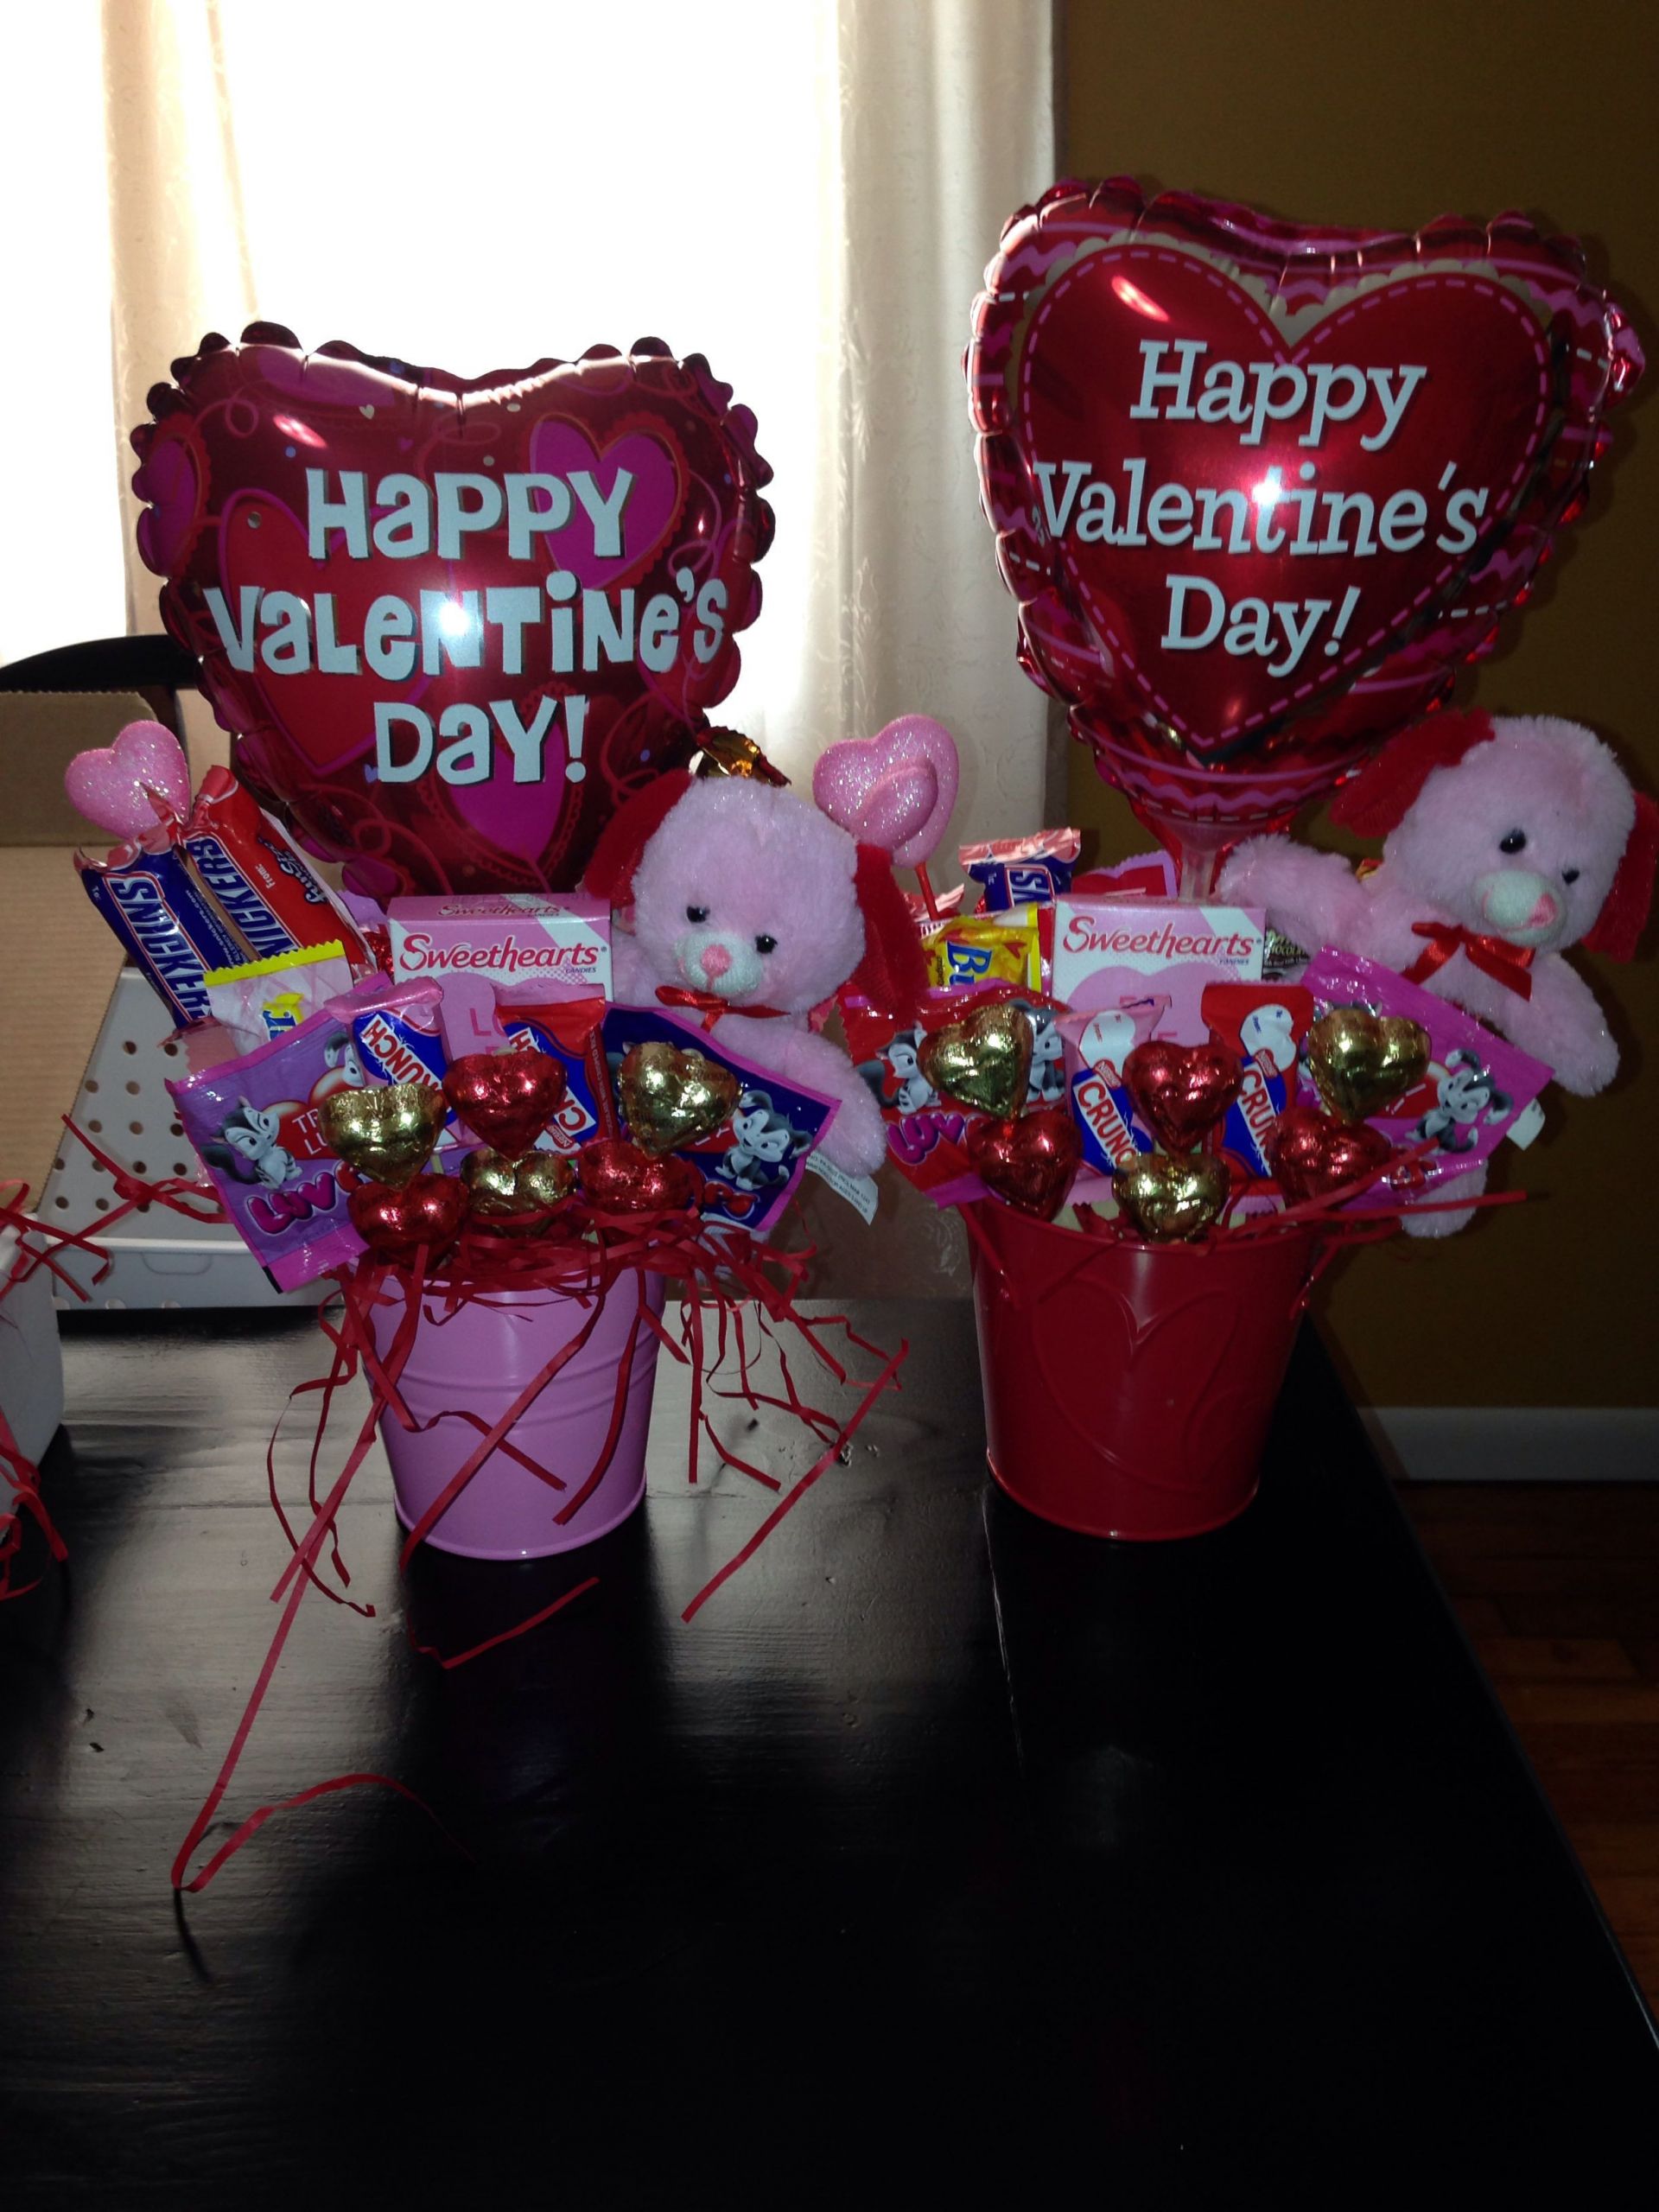 Valentines Day Candy Gift Ideas
 Valentines bouquet Candy bouquets